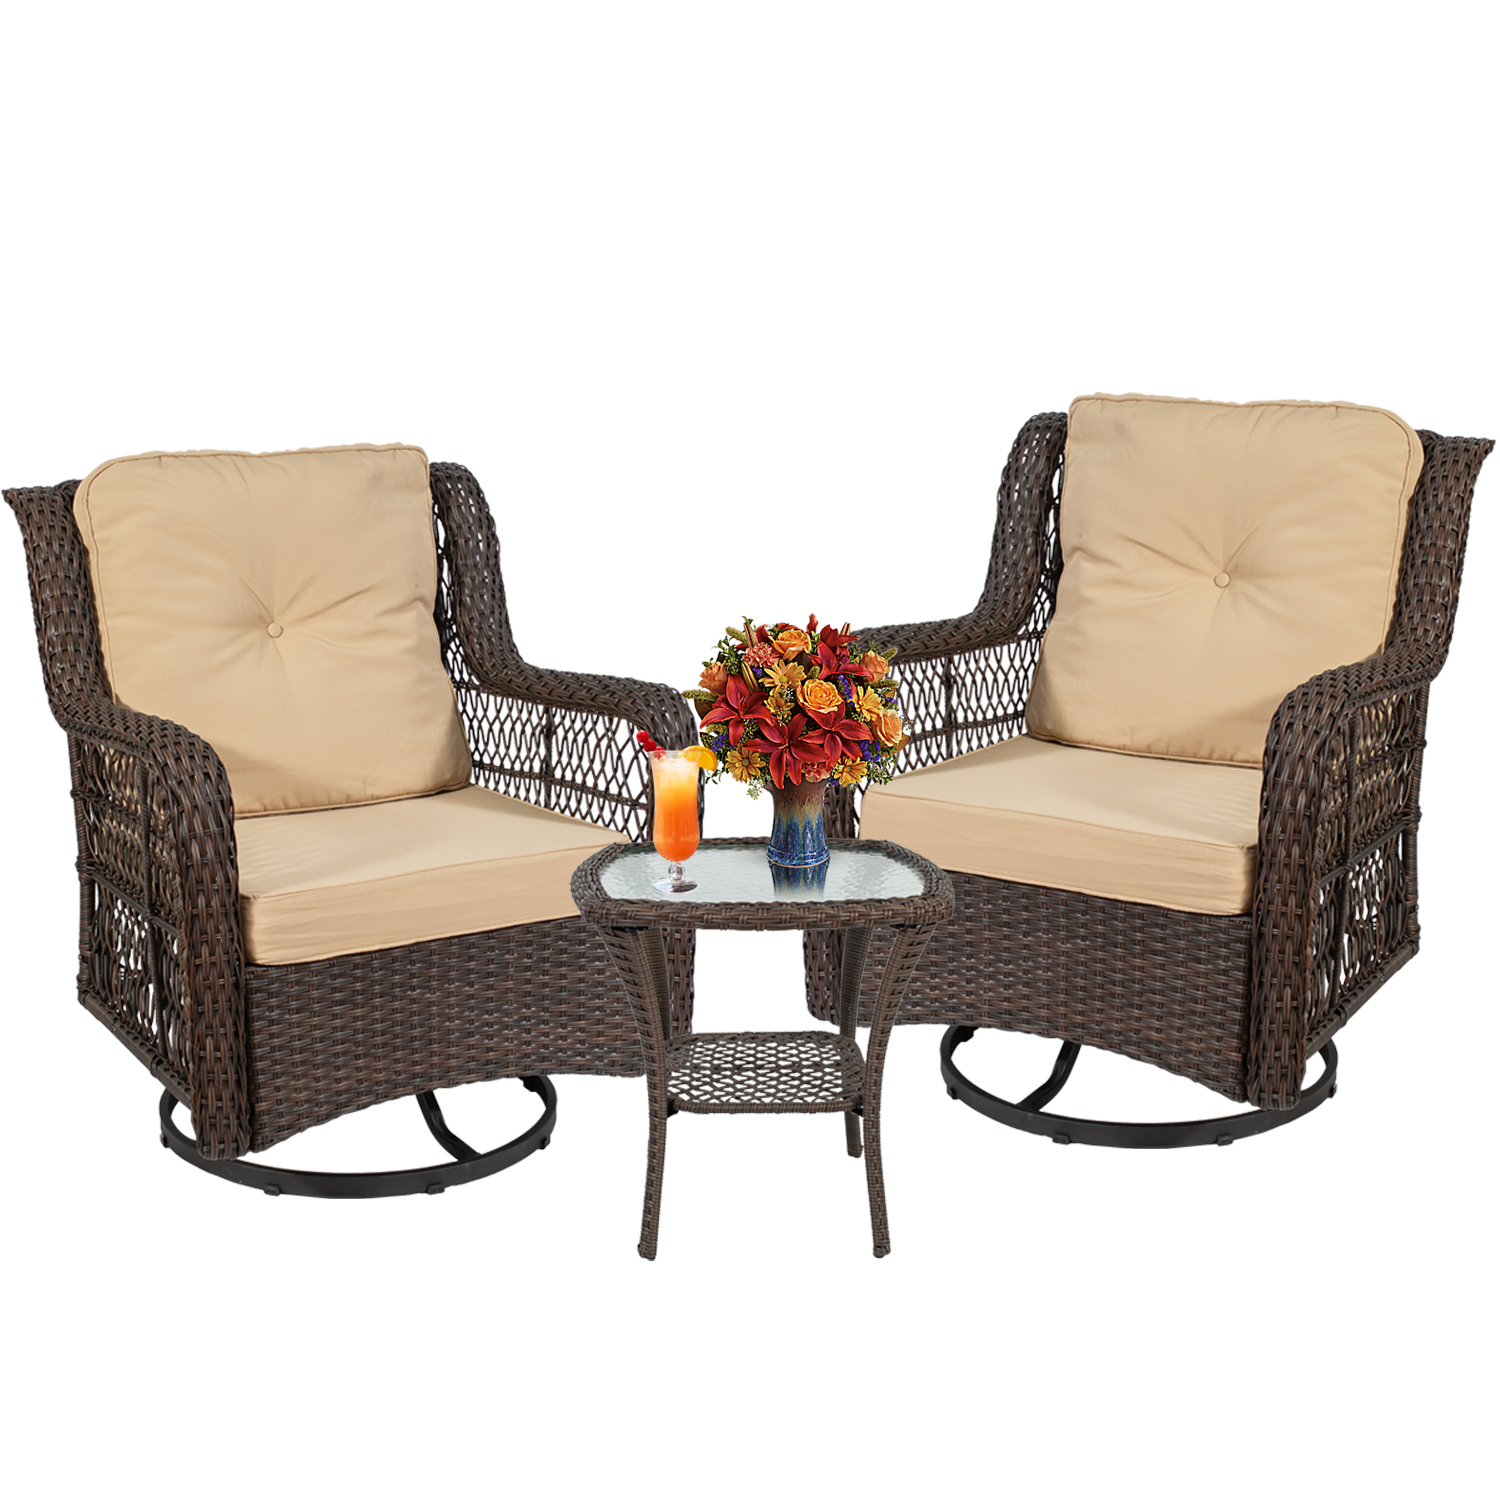 Outdoor Swivel Patio Lounge Chairs 3-Piece Patio Conversation Bistro Set w/Wicker Patio Chairs and Side Table for Small Space Deck Porch 350 LBS Beige - image 3 of 13